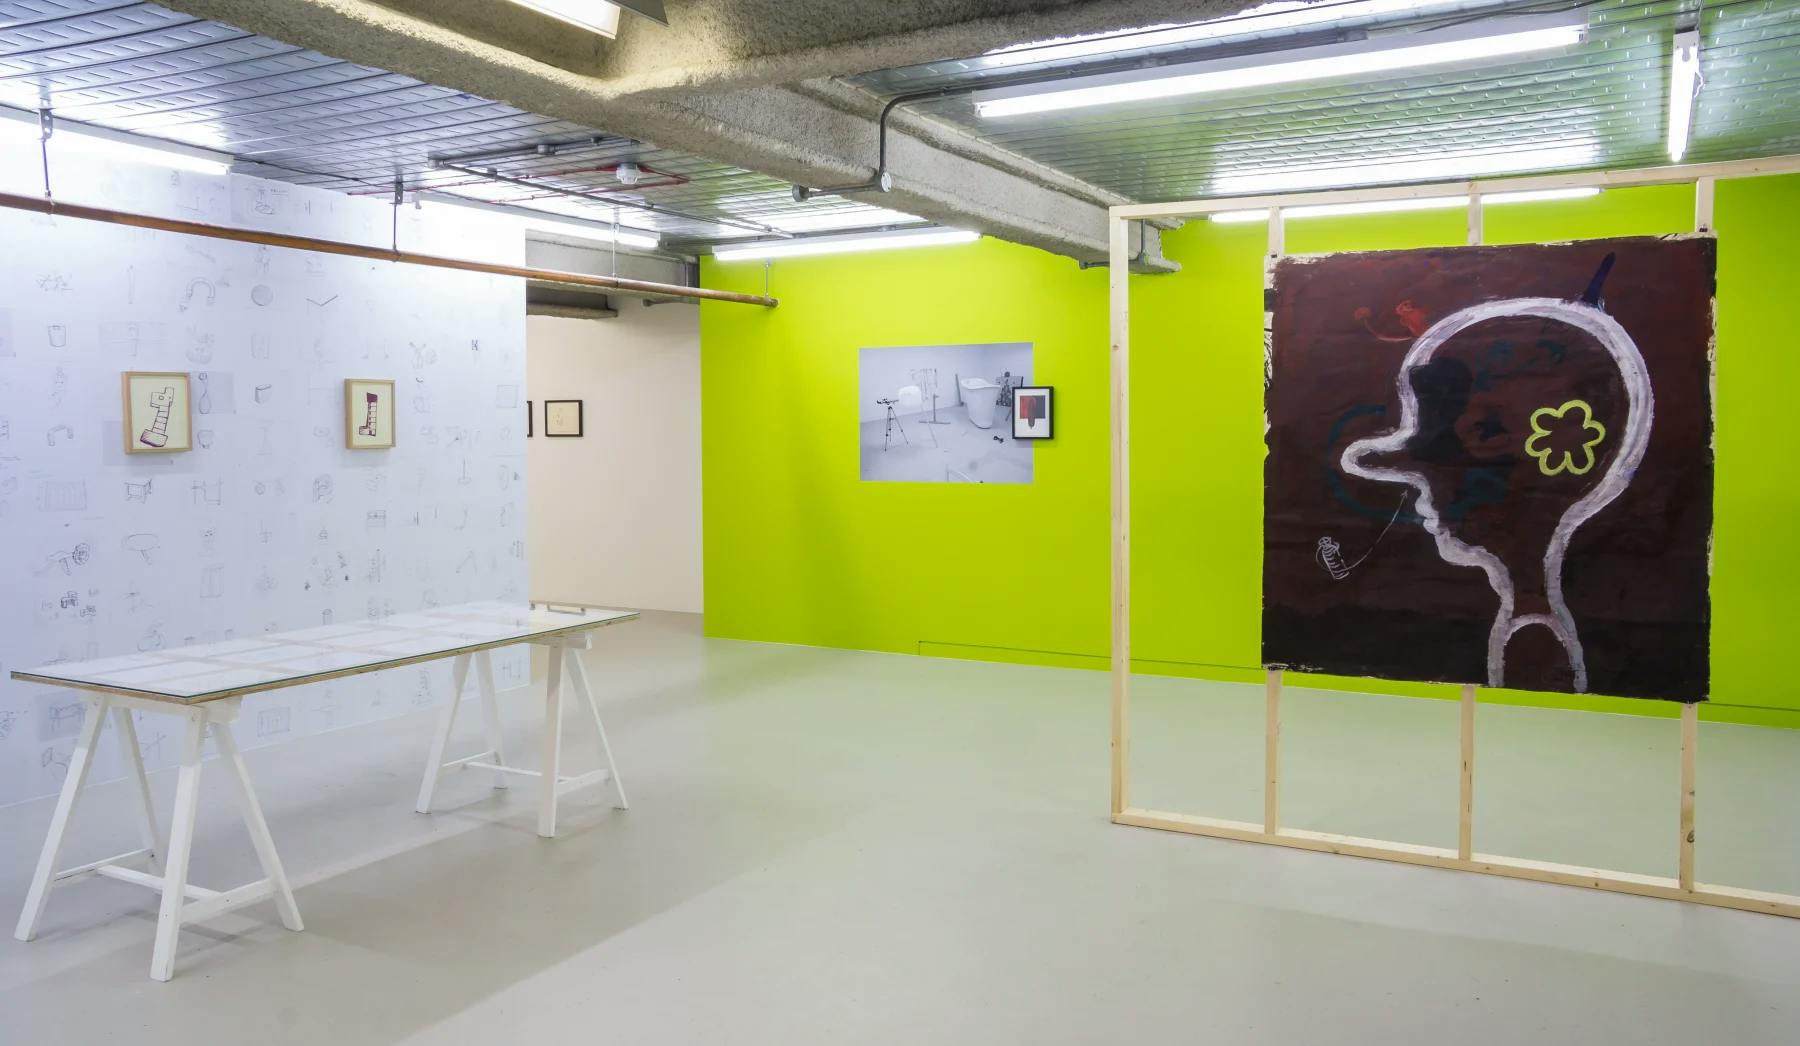 To the left is a series of artist's drawings and doodles photocopied and pasted to the wall. To the right is a large painting of a cartoon-like head with long nose installed on a timber frame. 